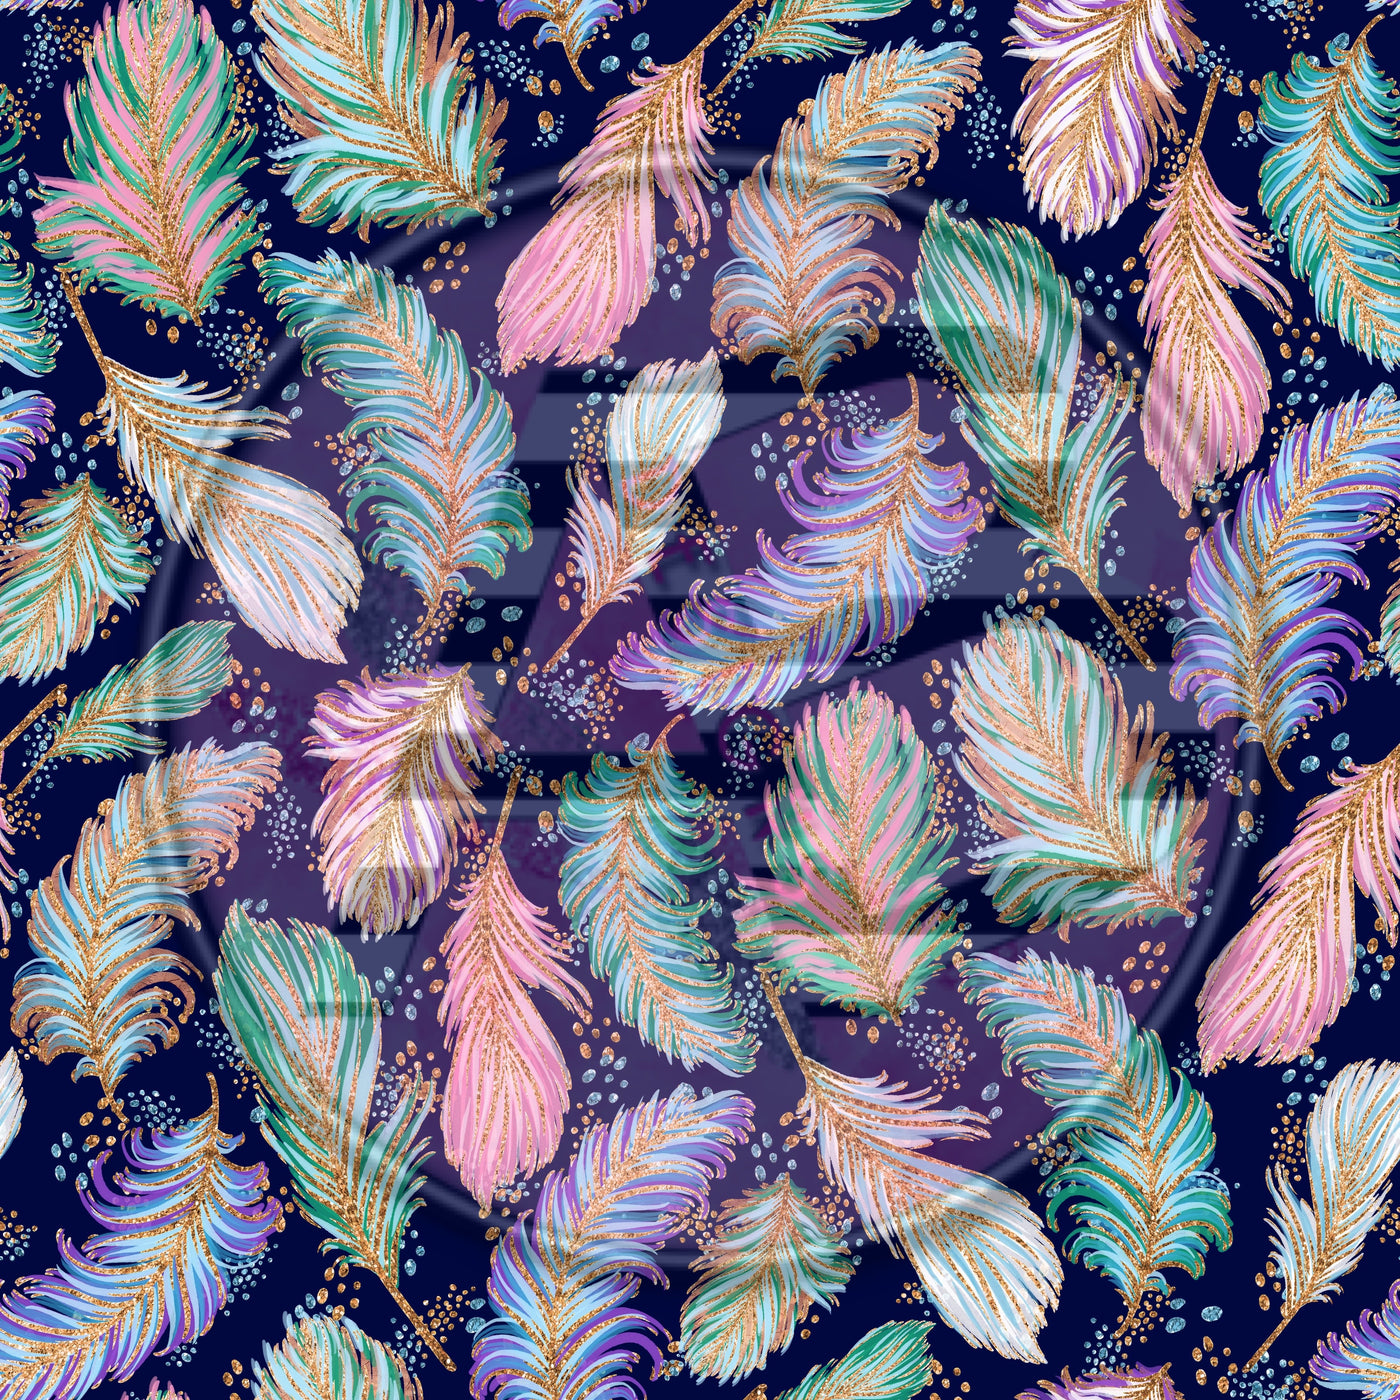 Adhesive Patterned Vinyl - Feathers 173